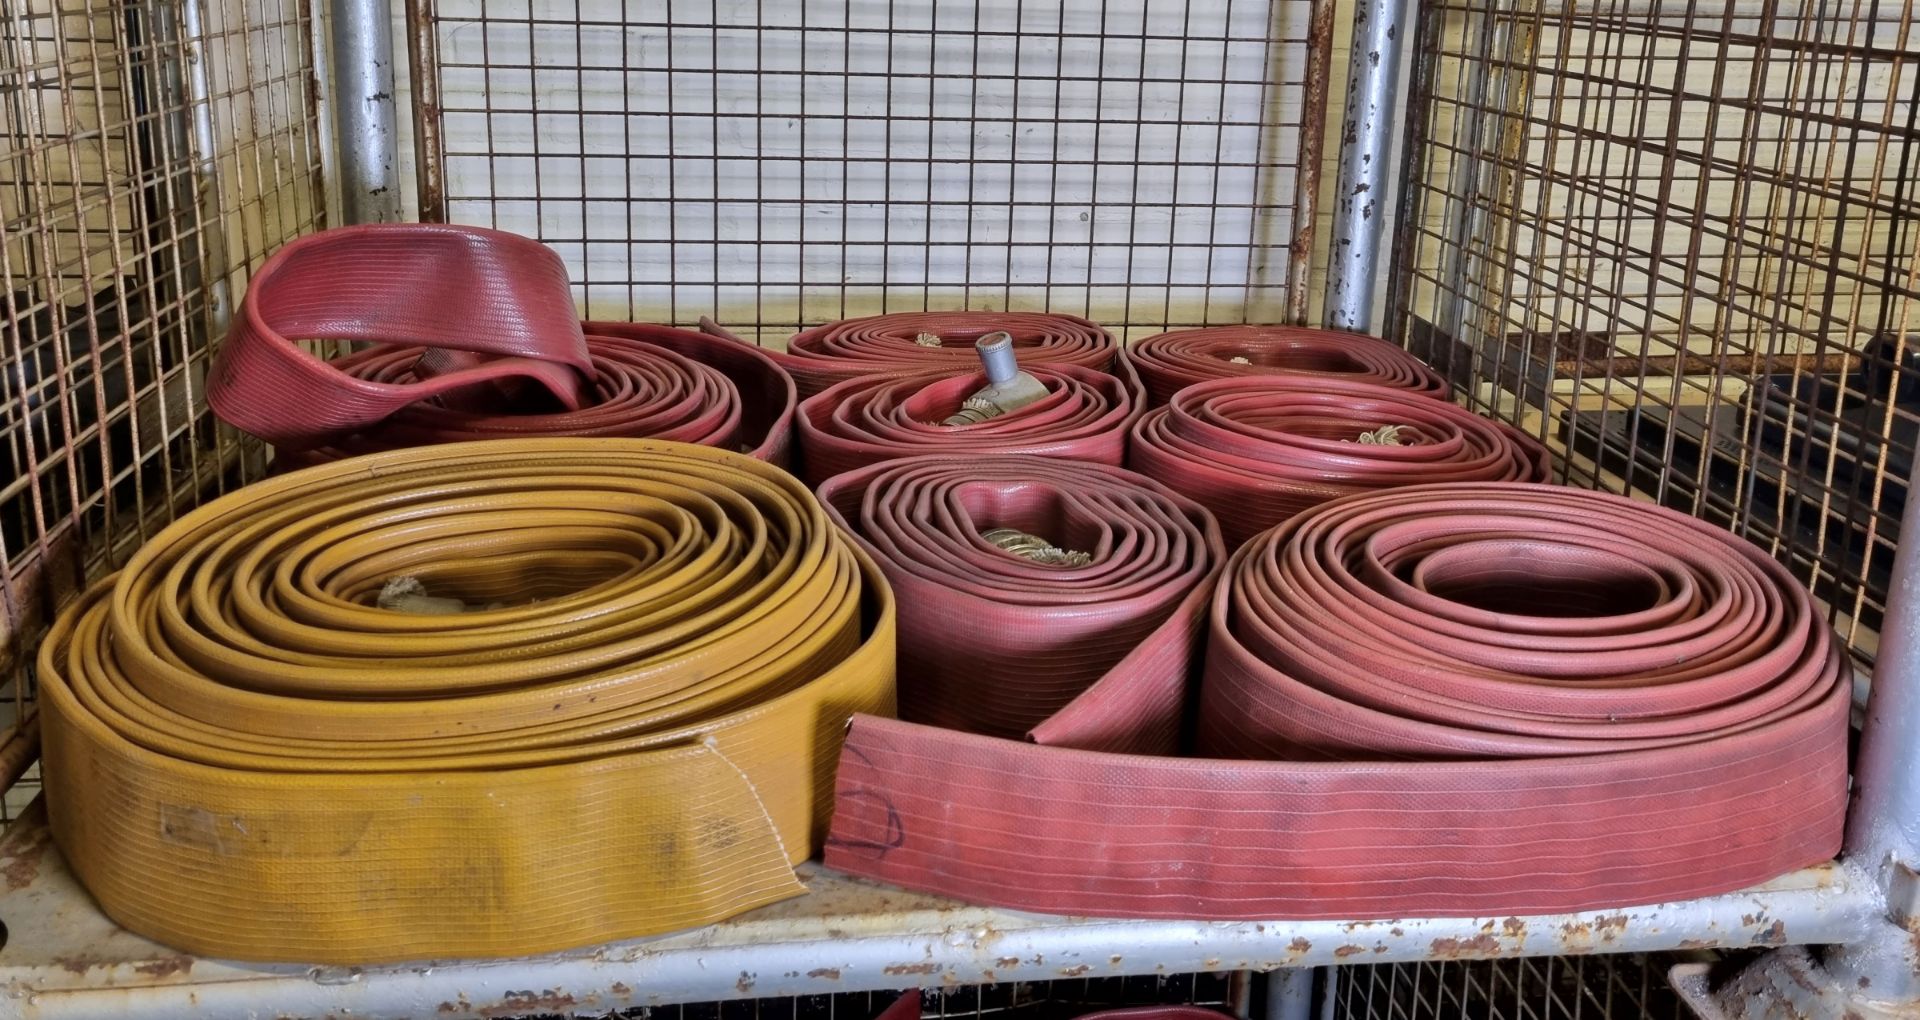 8x Layflat fire hose - mixed sizes, some missing couplings